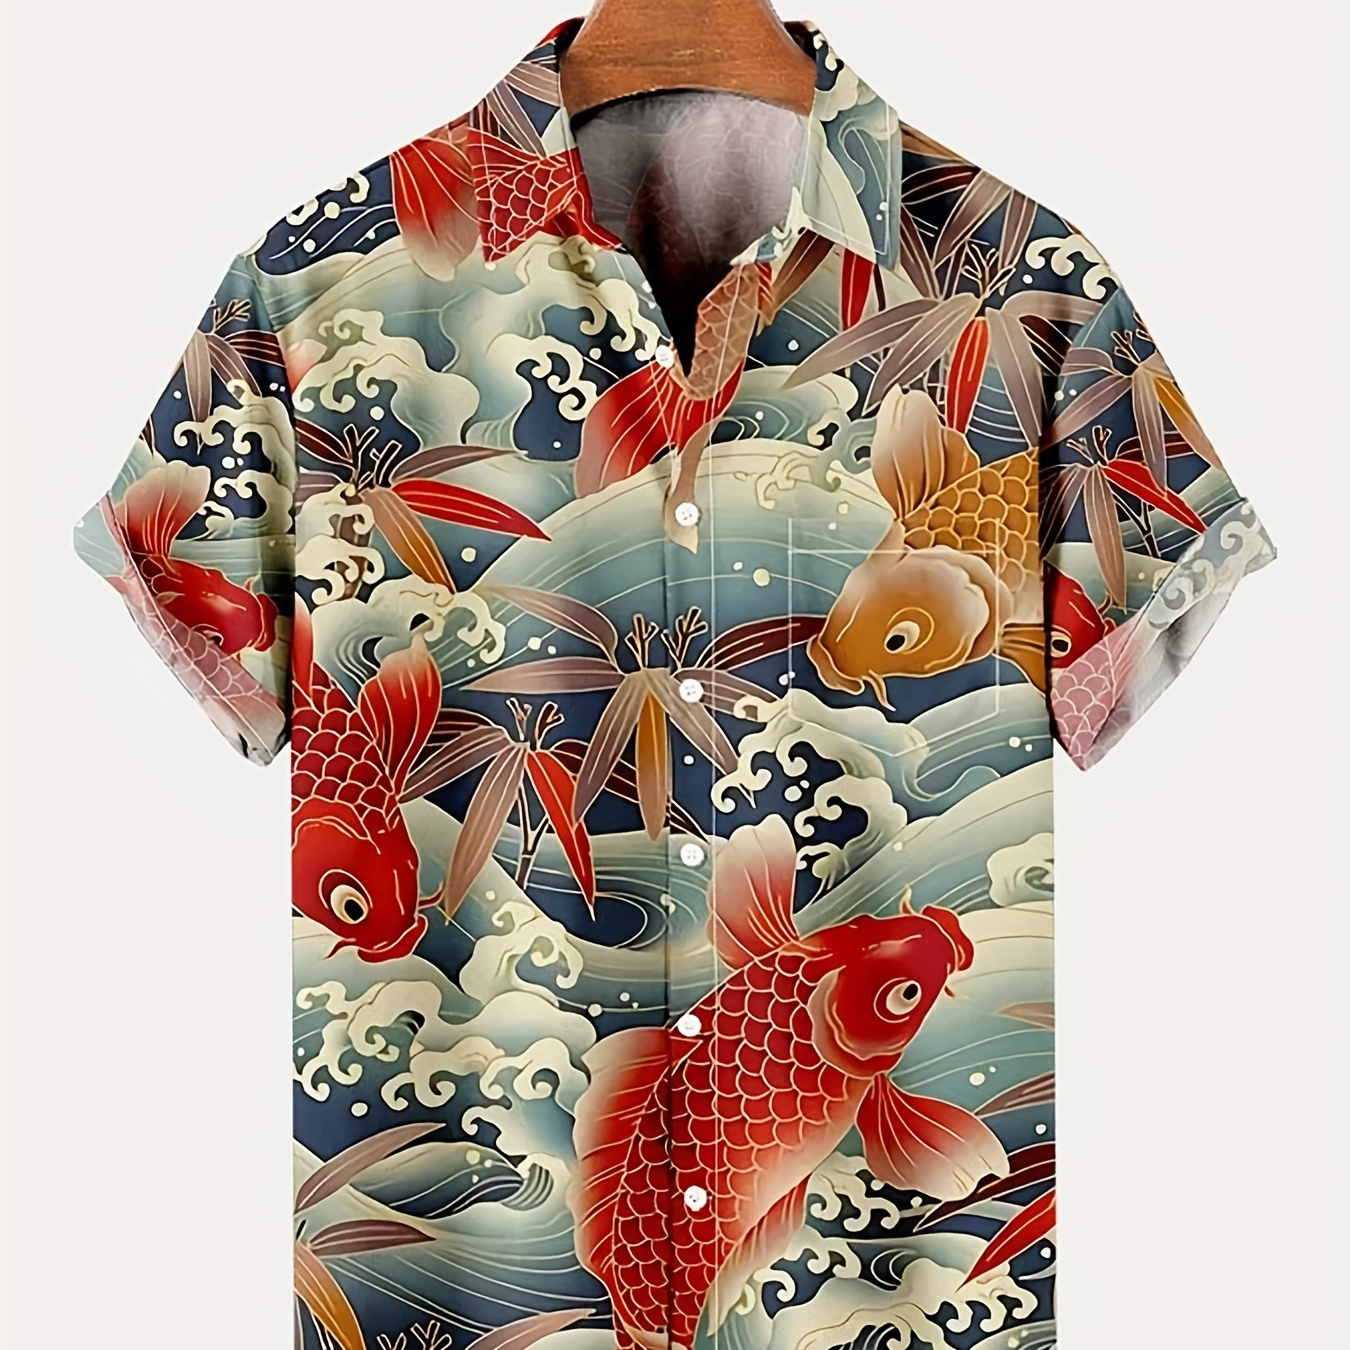 

Plus Size Men's Hawaiian Shirts For Beach, Retro Pattern Printed Short Sleeve Aloha Shirts, Oversized Casual Loose Tops For Summer